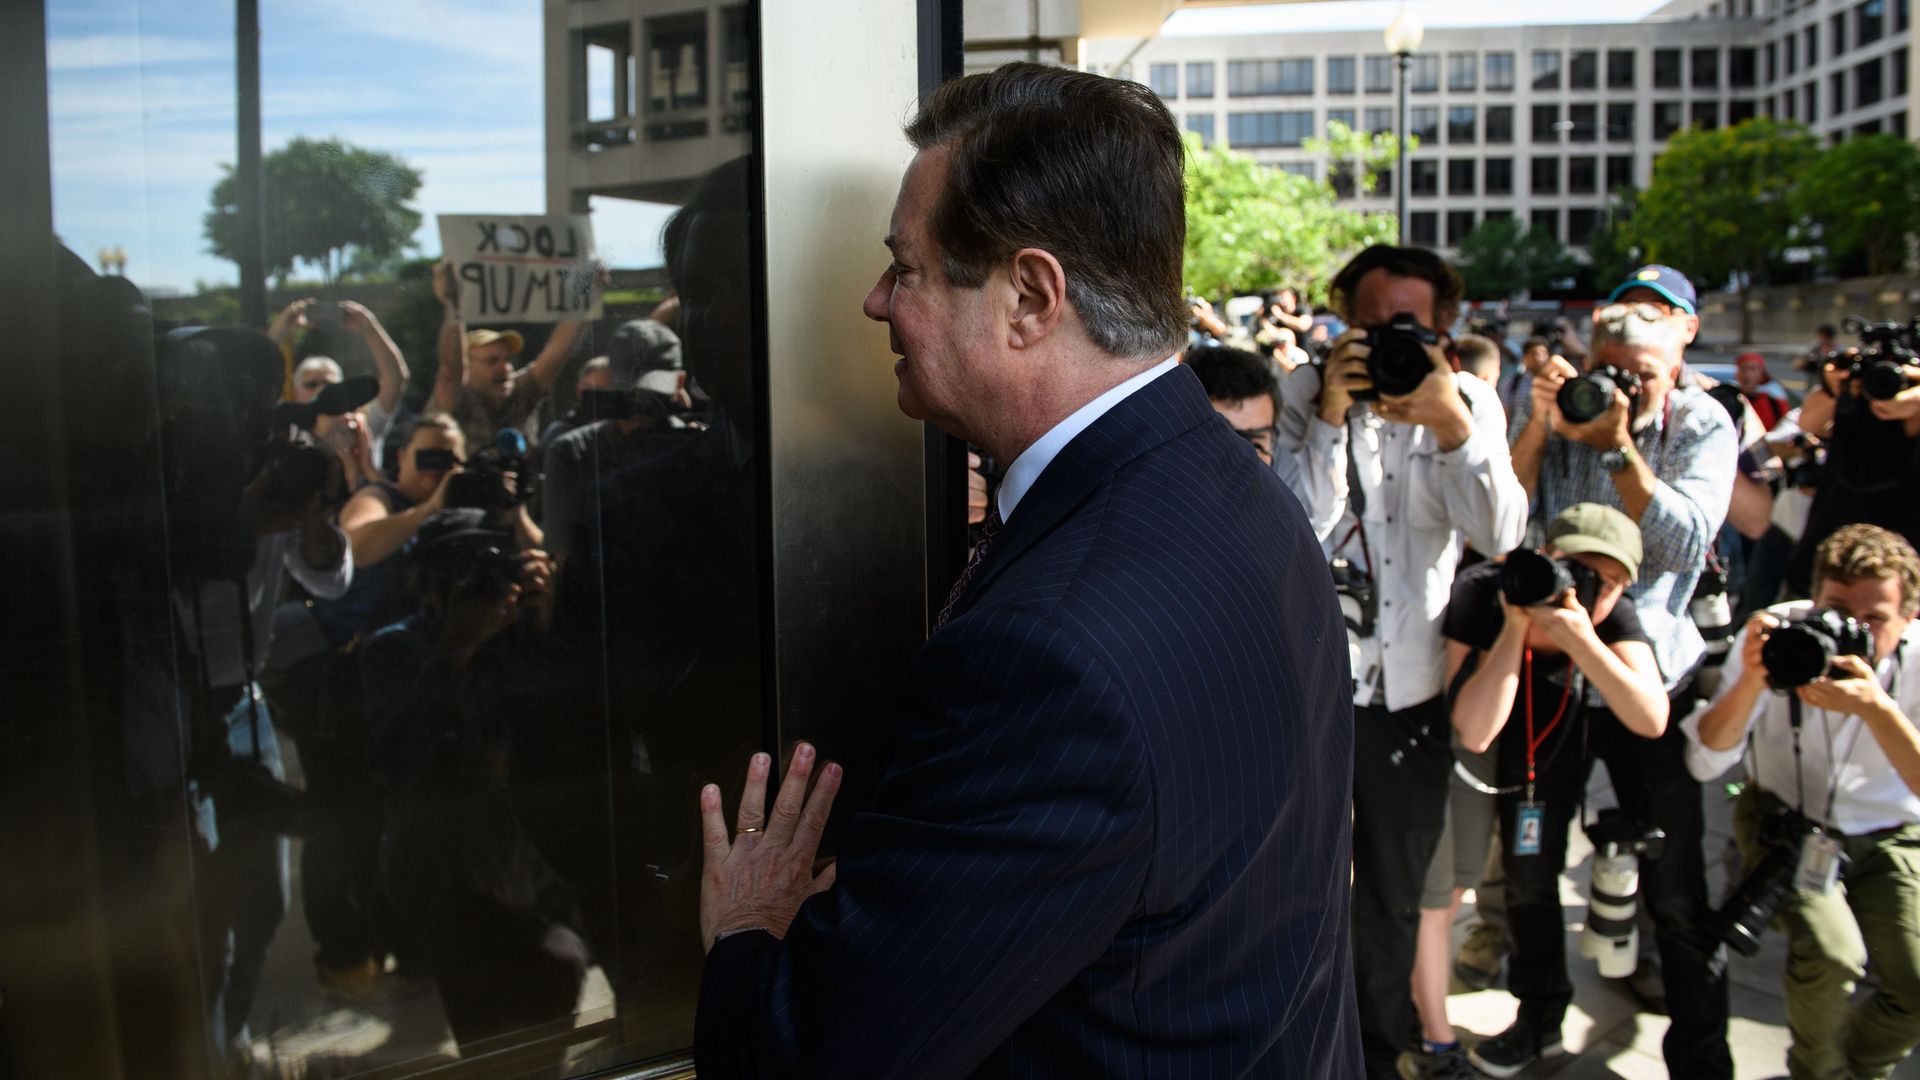 Paul Manafort pushes on a reflecting door while photographers take photos of him.